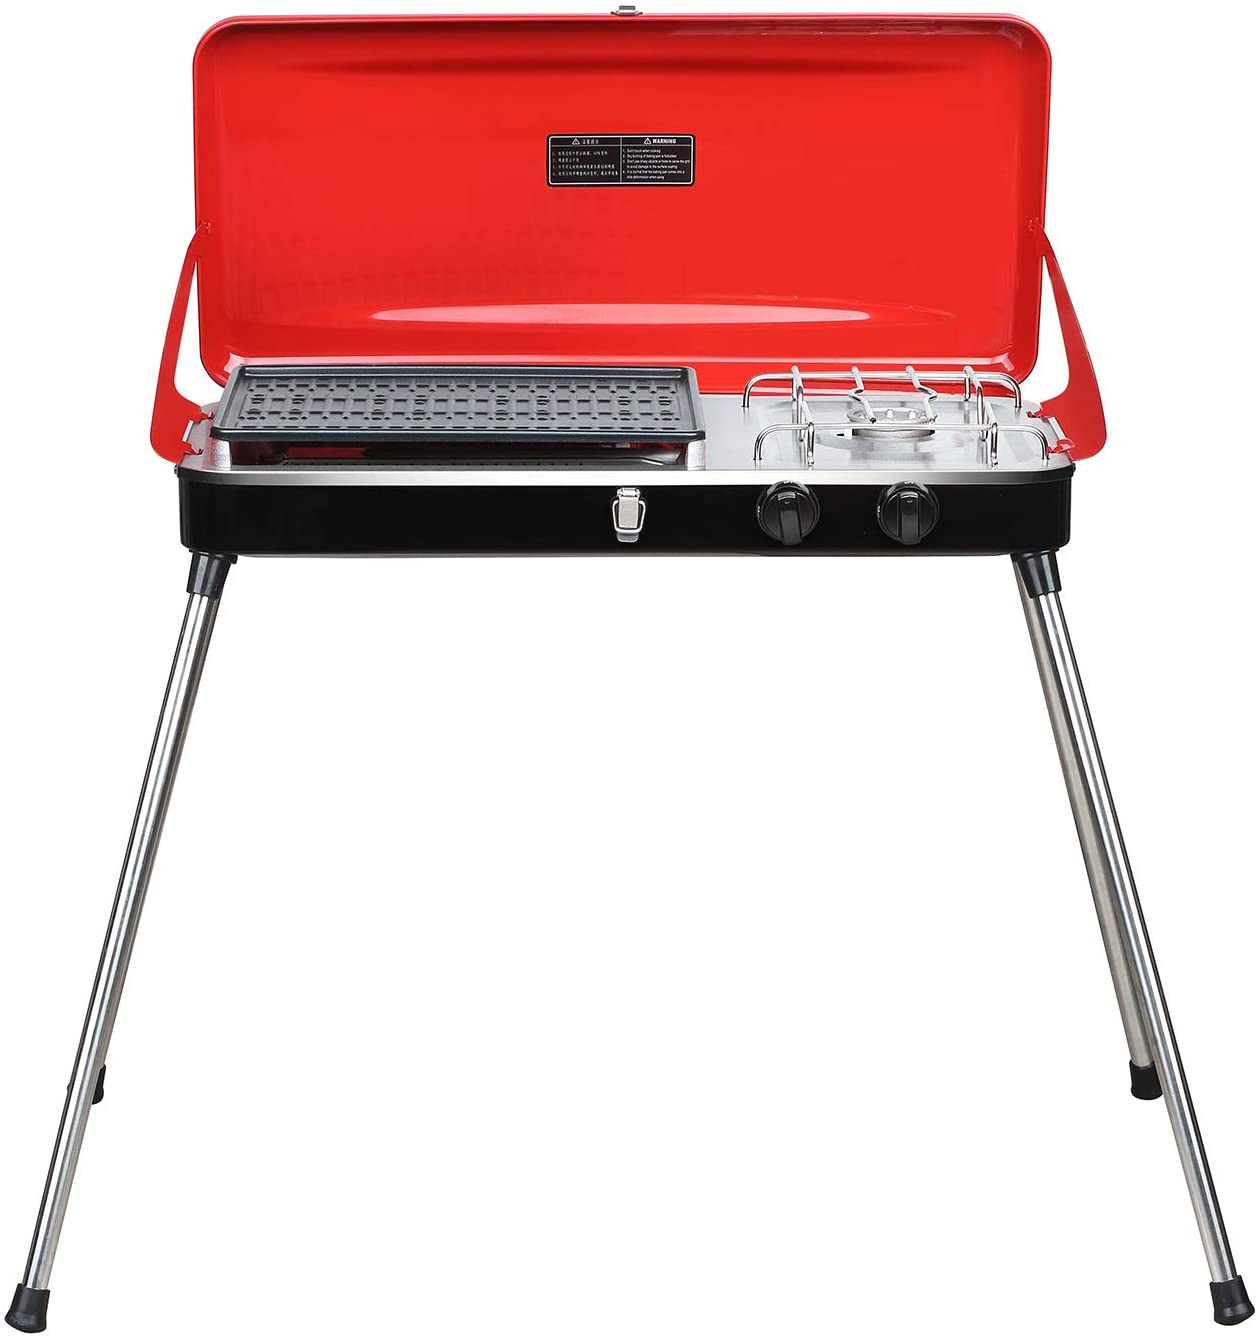 Camping Gas Stove & Barbecue Grill With Legs